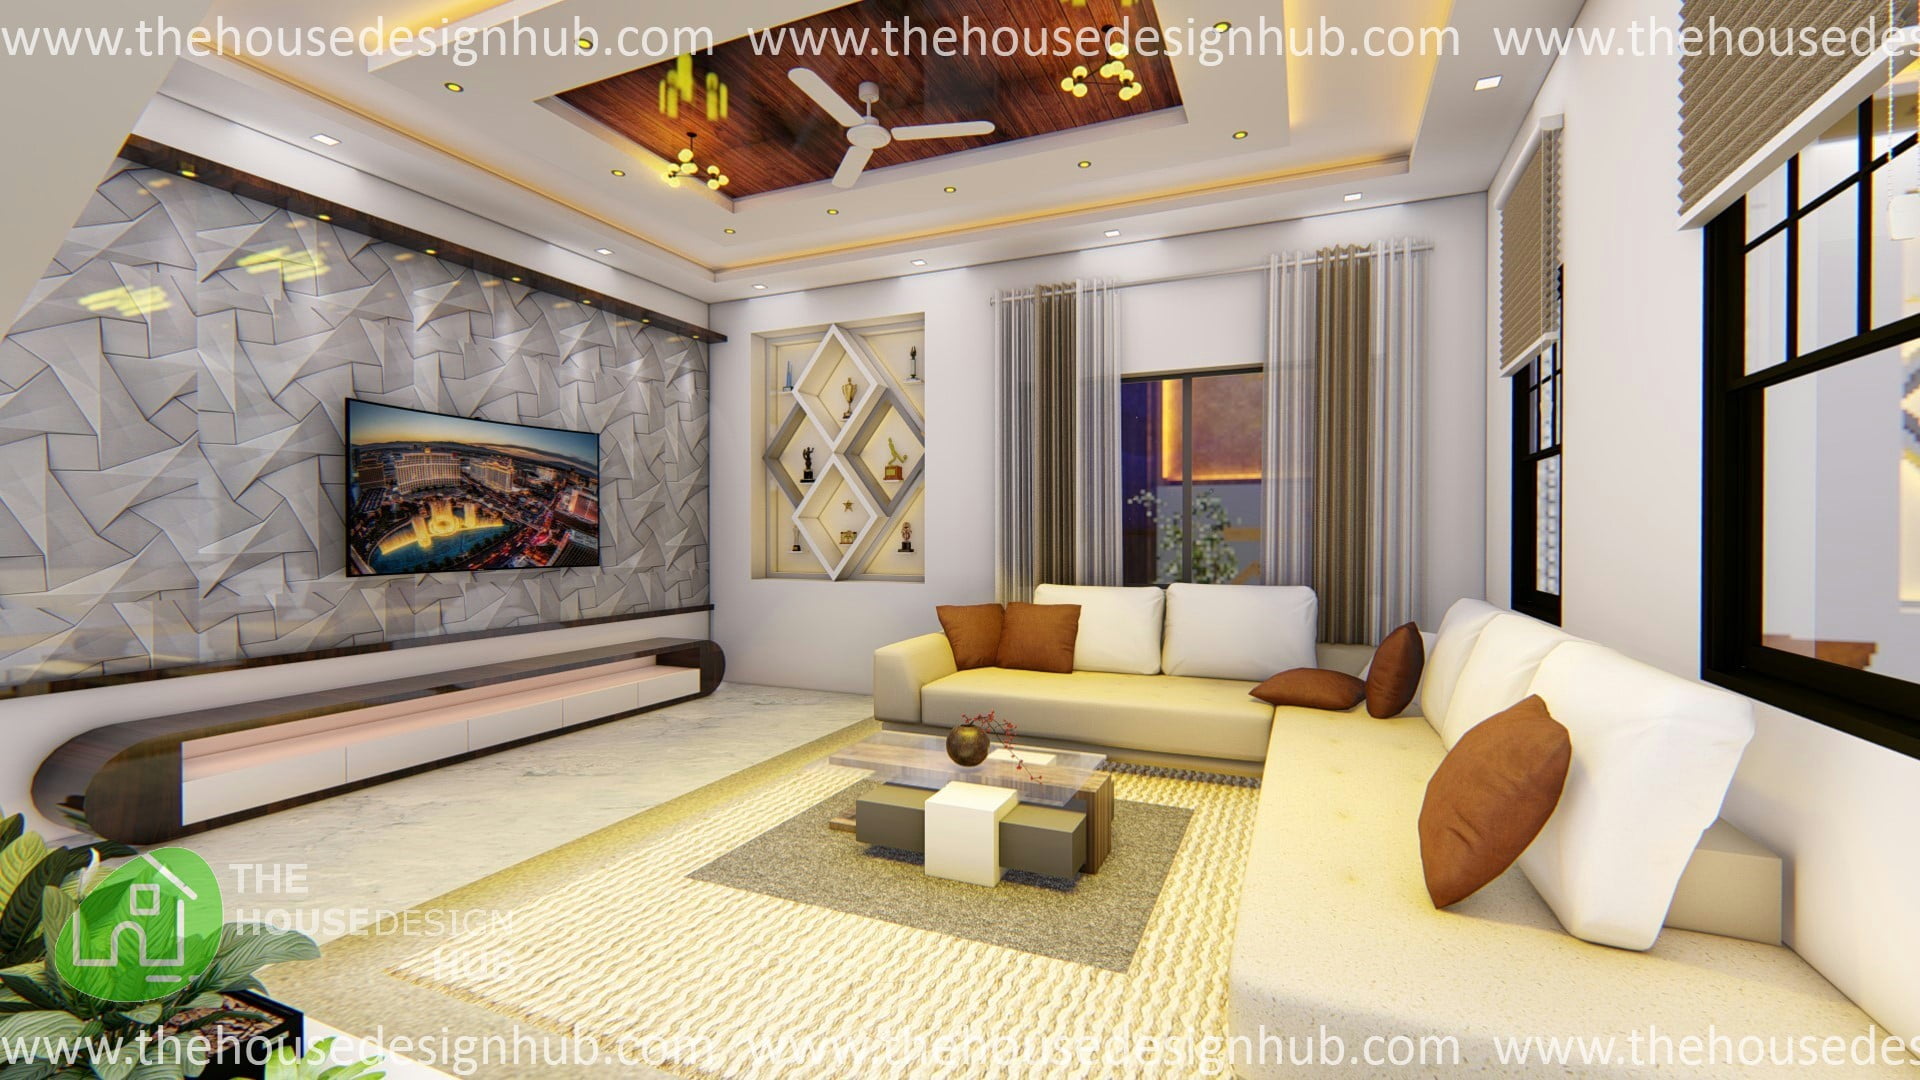 Amazing Living Room Interior Design In Low Budget   The House ...